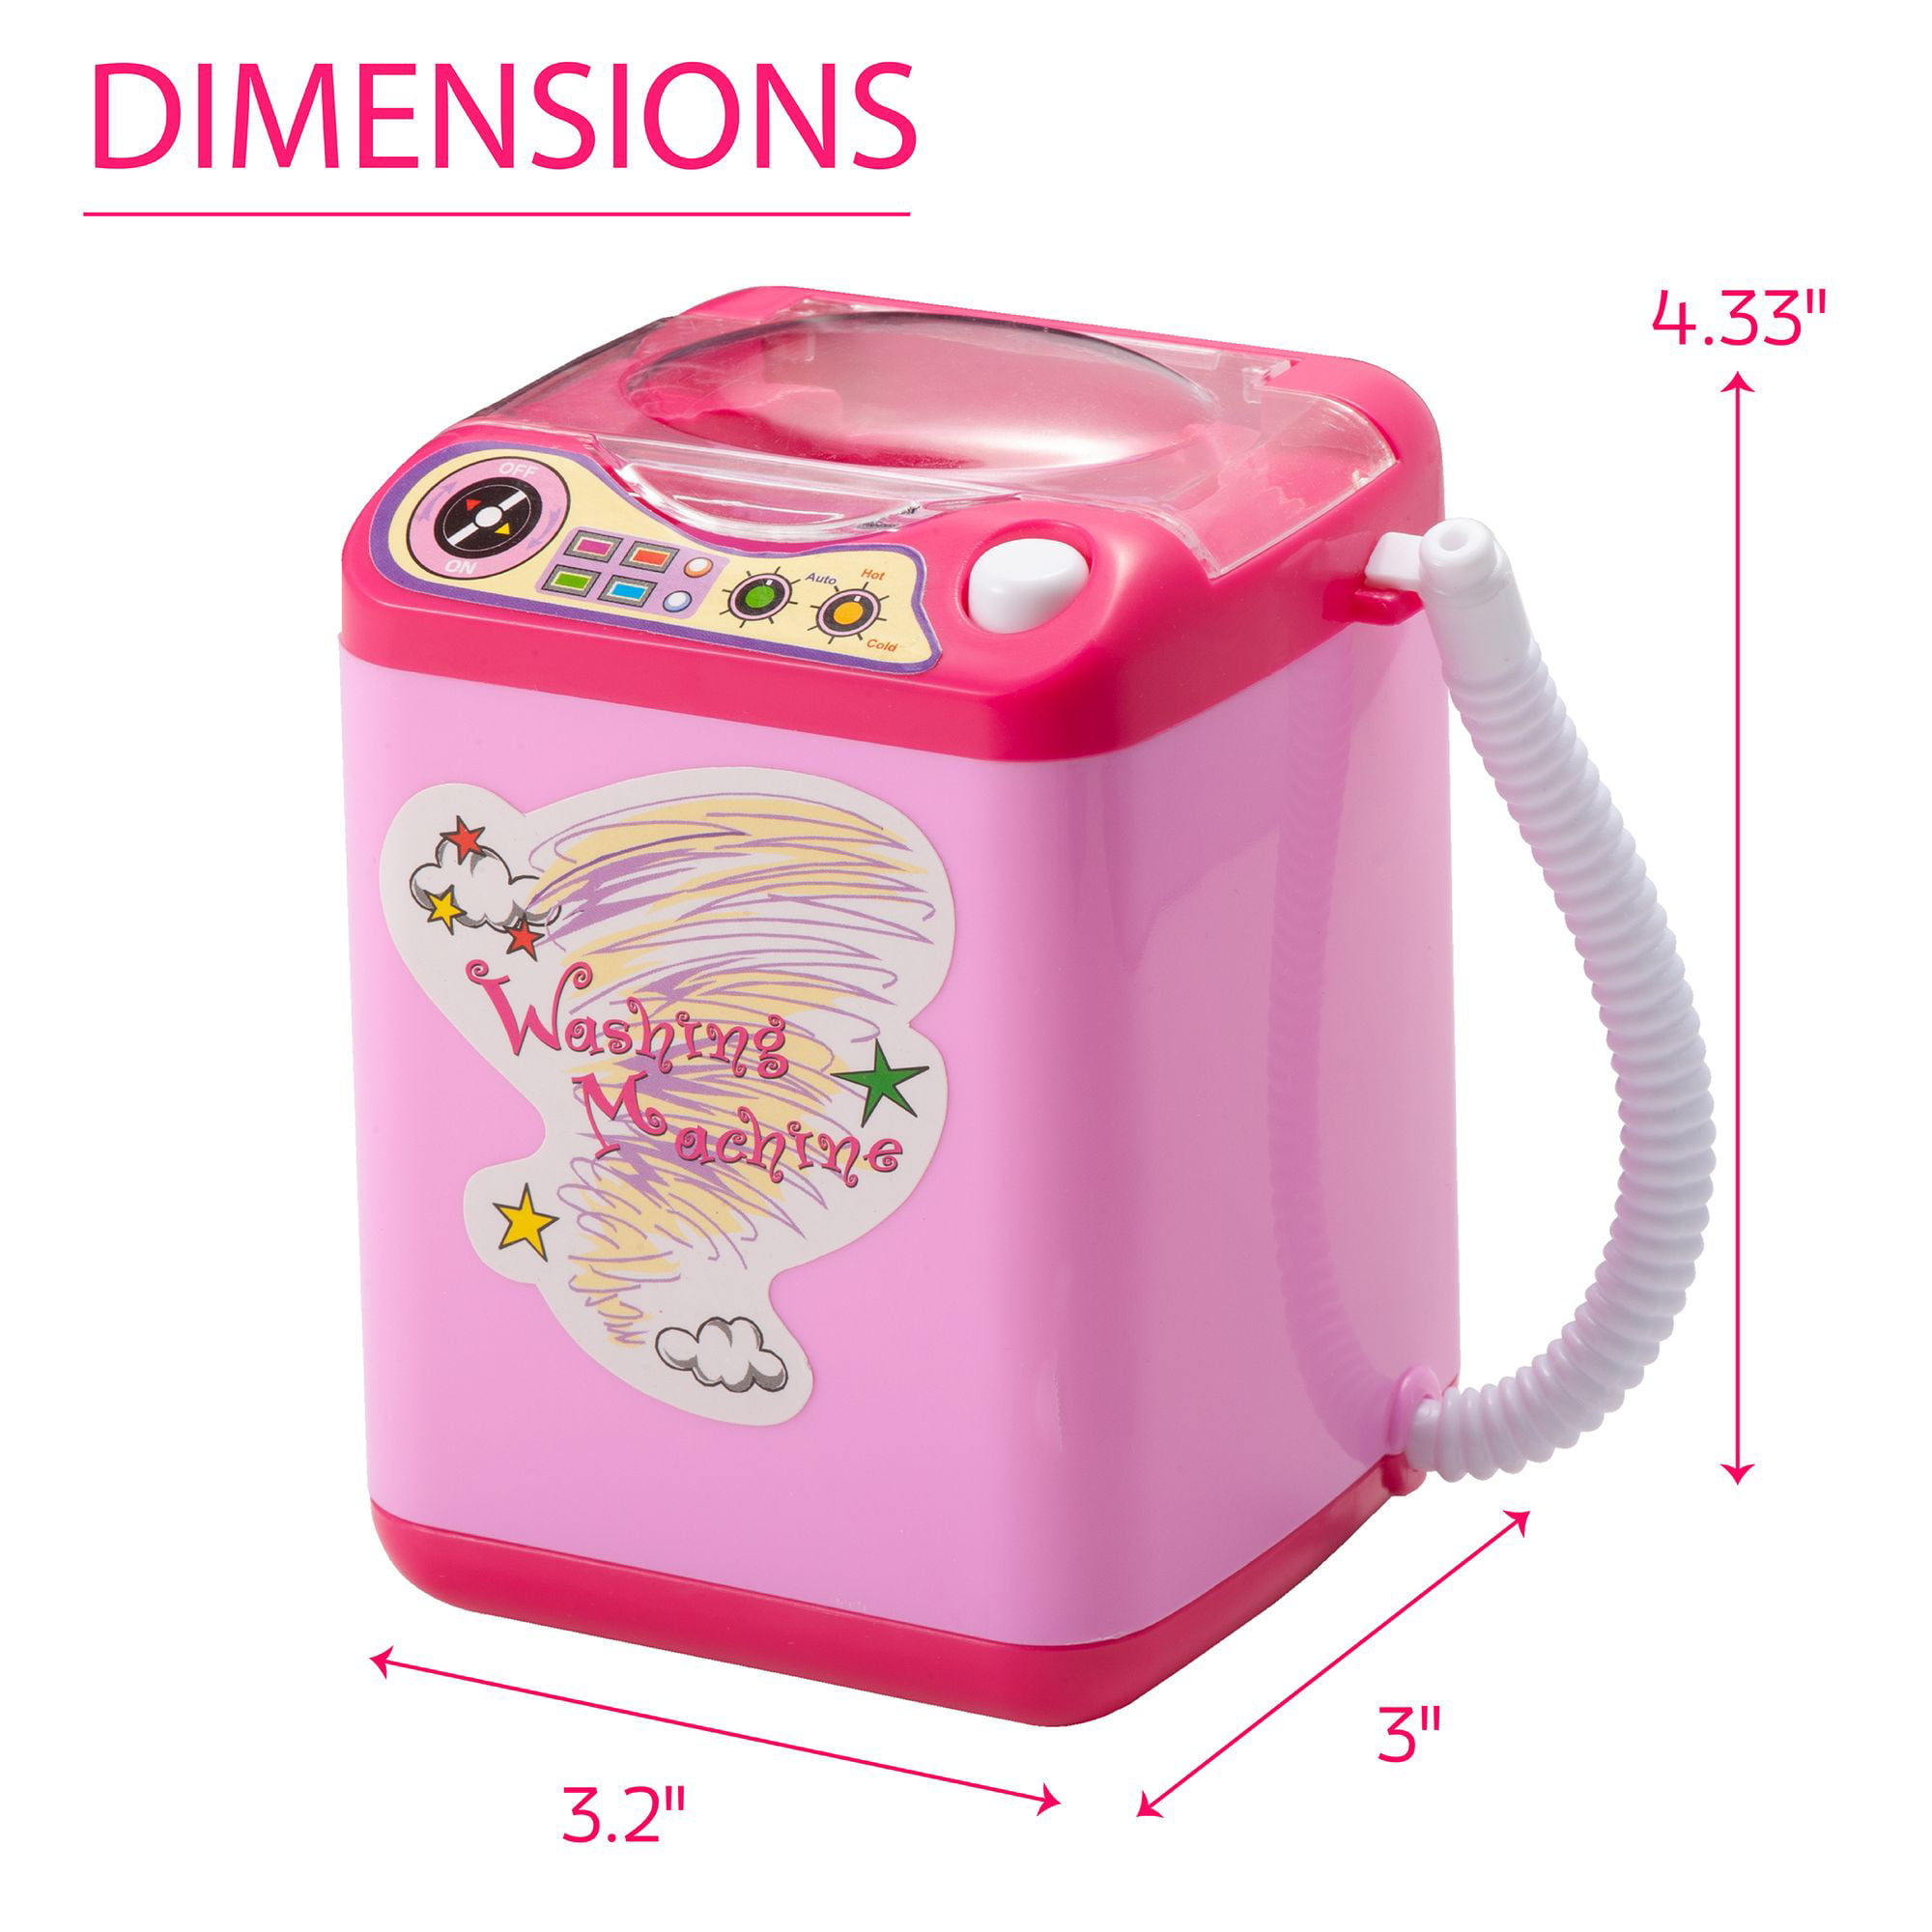 Quick Cleaning & Quick Drying Washing Machine 02 2 Color Mini Portable Simulation Washing Machine for Make up Brushes with dehydration function